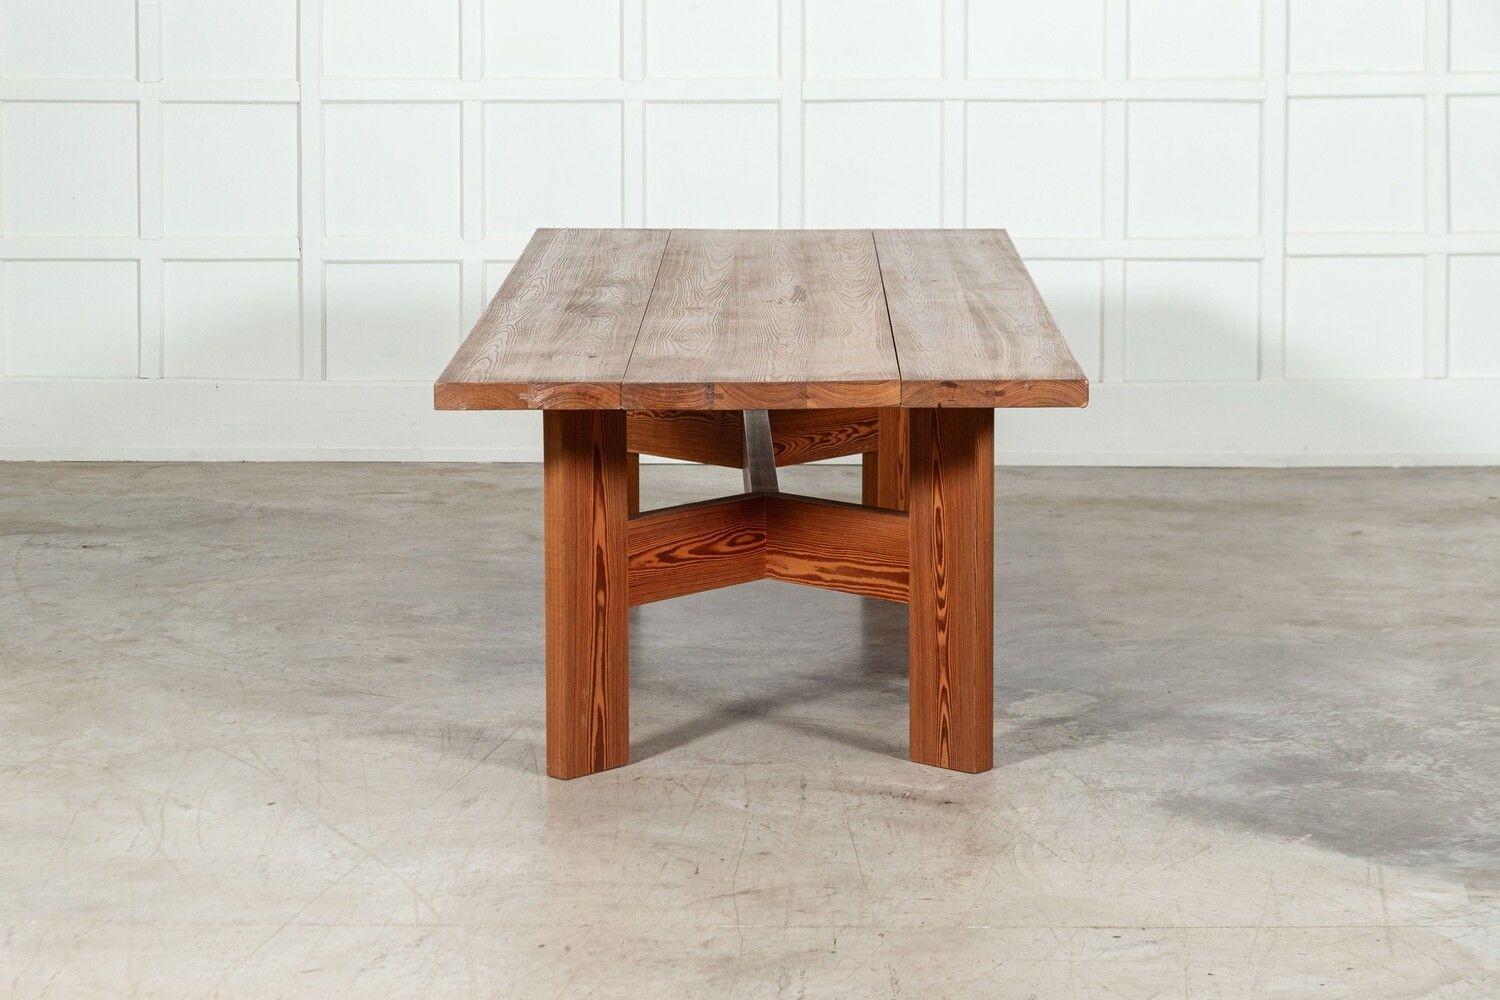 20th Century Large MidC English Pine Refectory Table / Desk For Sale